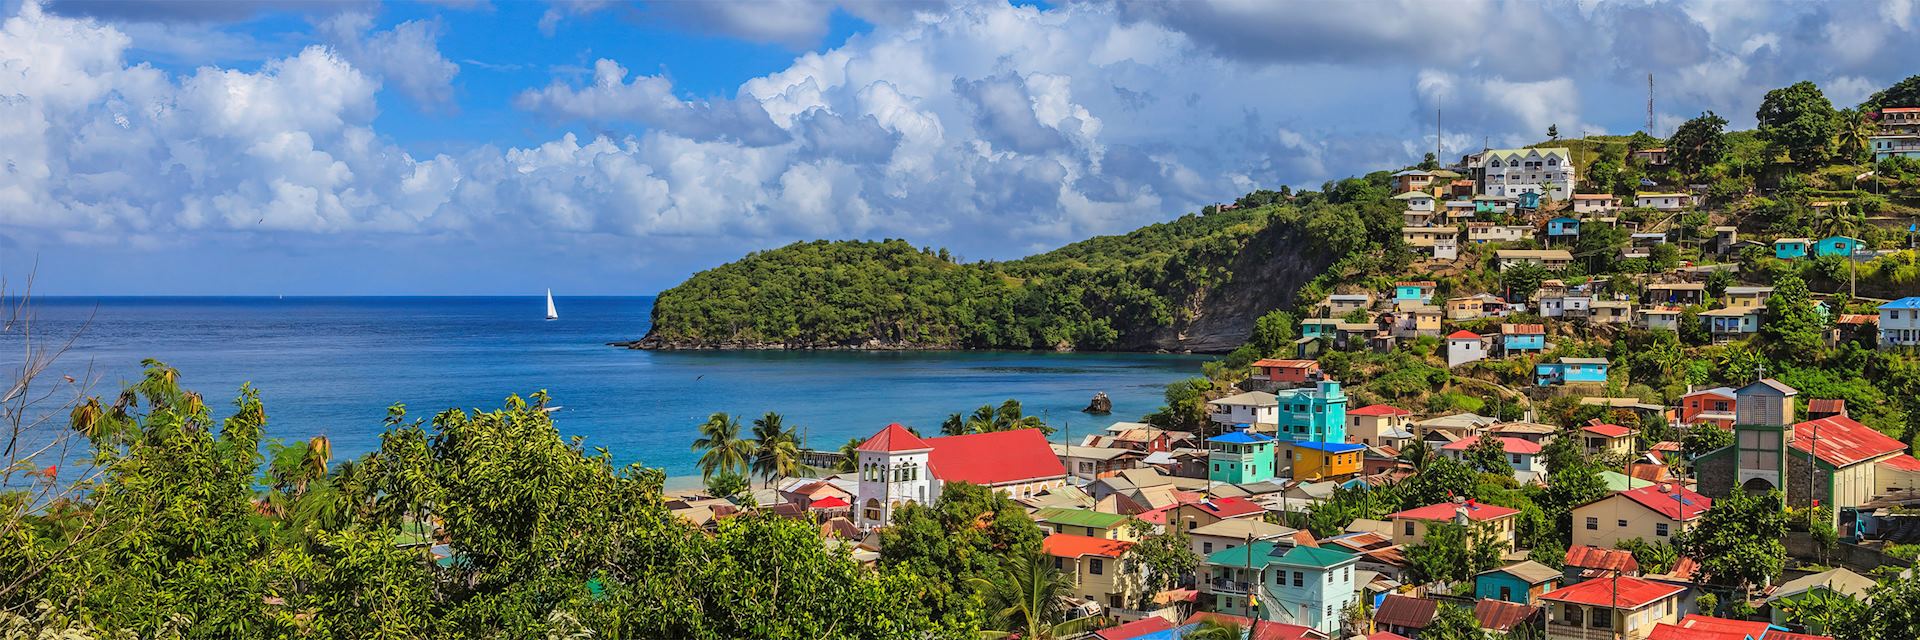 Canaries, a small village on the west coast of Saint Lucia